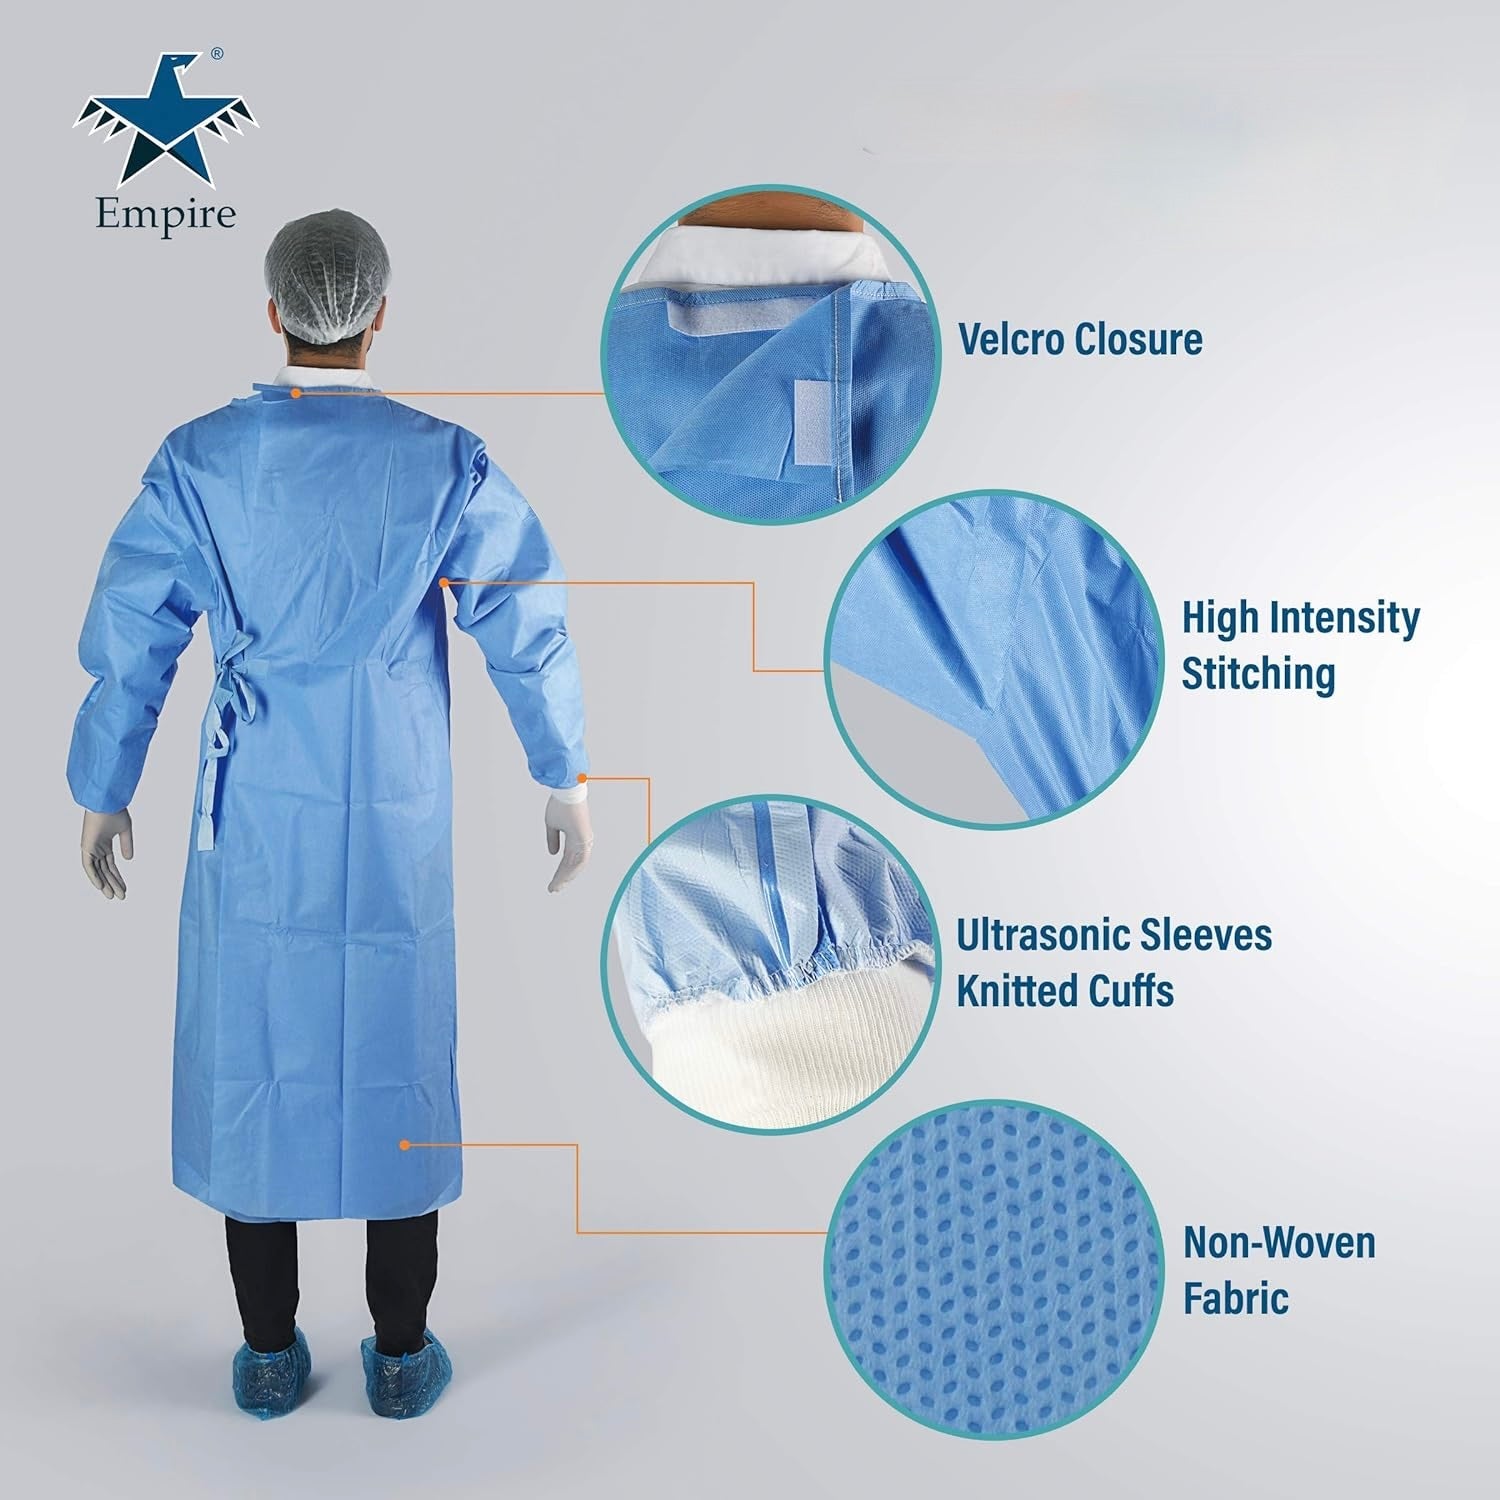 Sterile High Performance Surgical Gown Reinforced Double Wrapped with 2 x hand towels 30 x 40 cm Body 41gsm SMMS laminated with 30gsm PP + PE Reinforcement hook-and-loop Fastening Adjustable Neckline Size Large EN13795